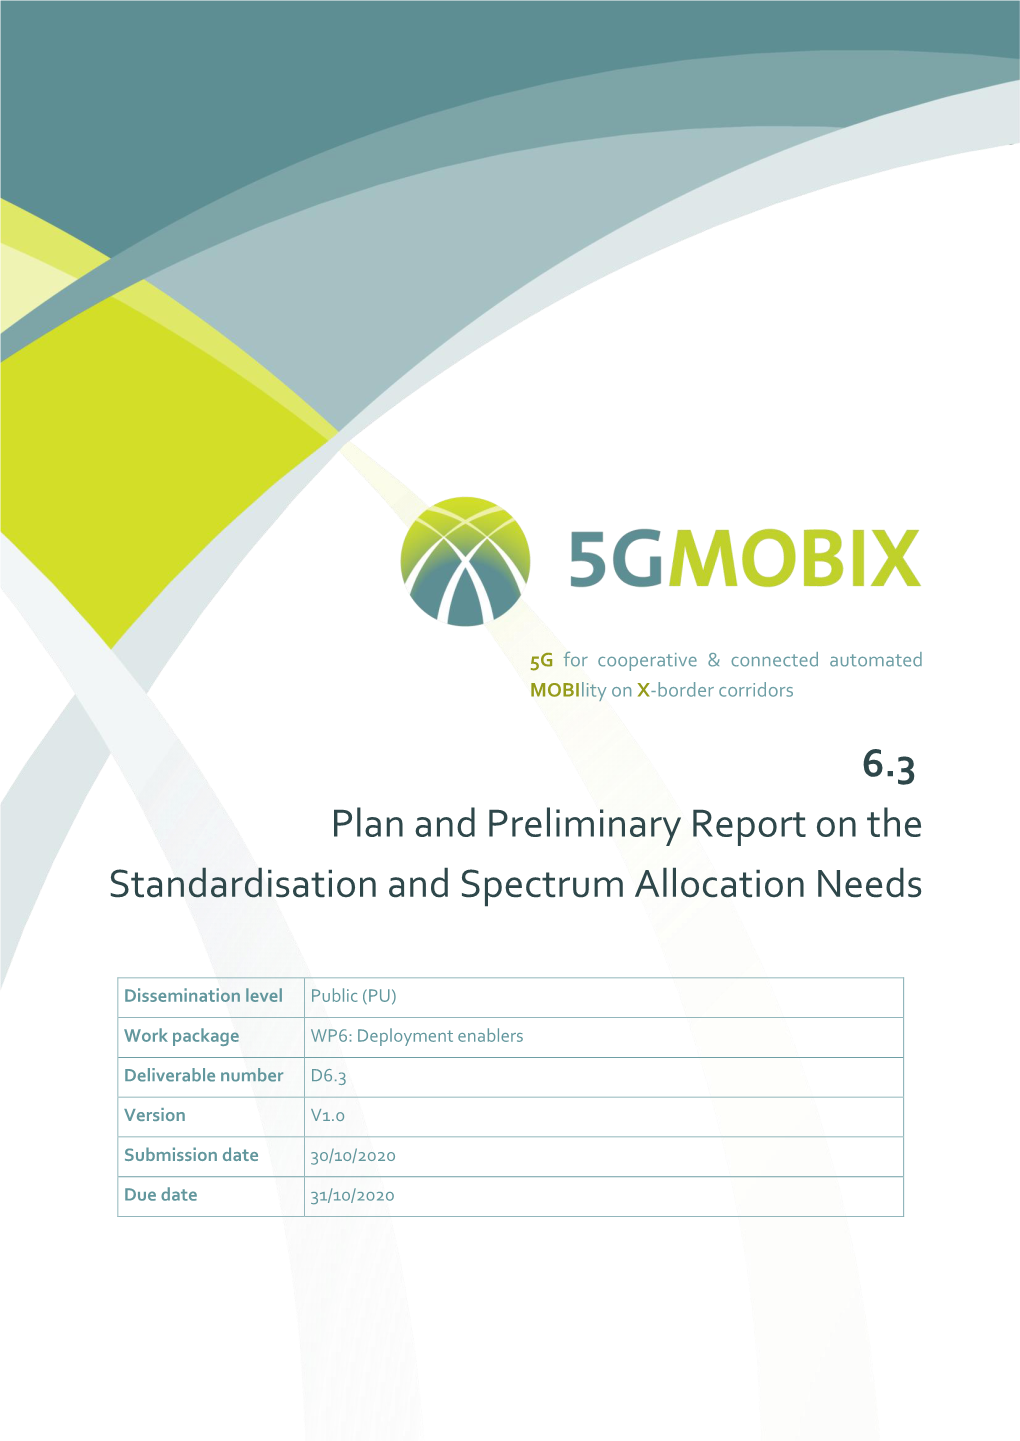 6.3 Plan and Preliminary Report on the Standardisation and Spectrum Allocation Needs